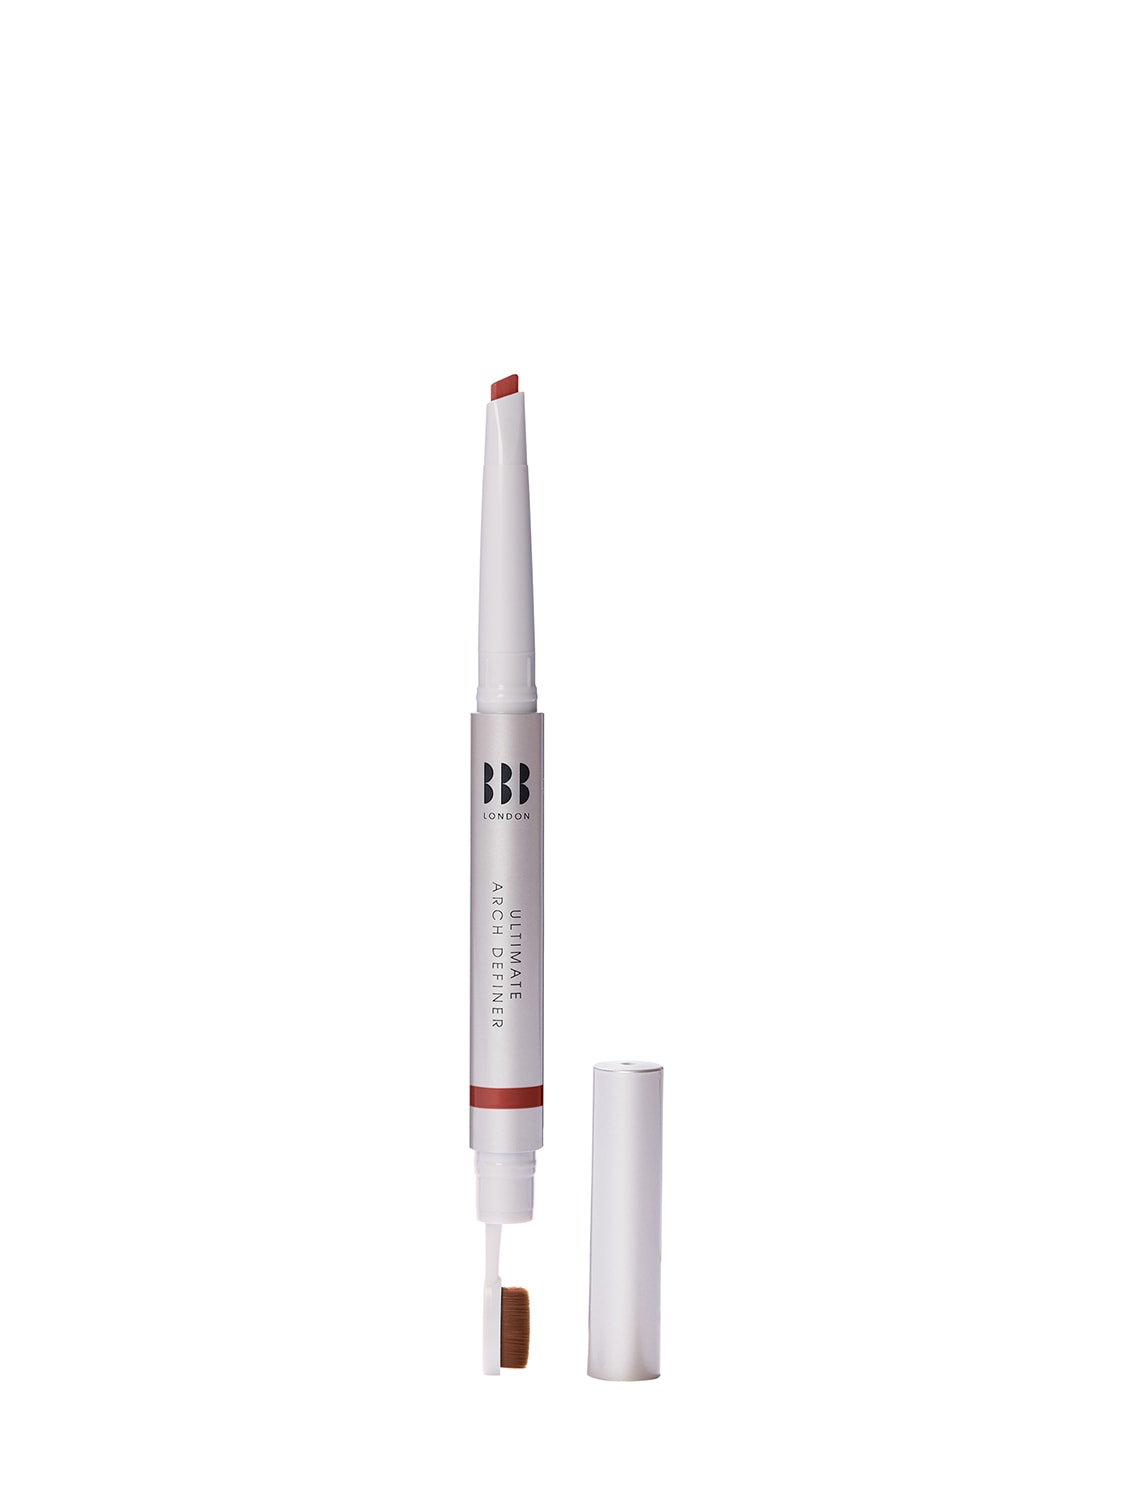 Image of The Ultimate Arch Definer Brow Pencil